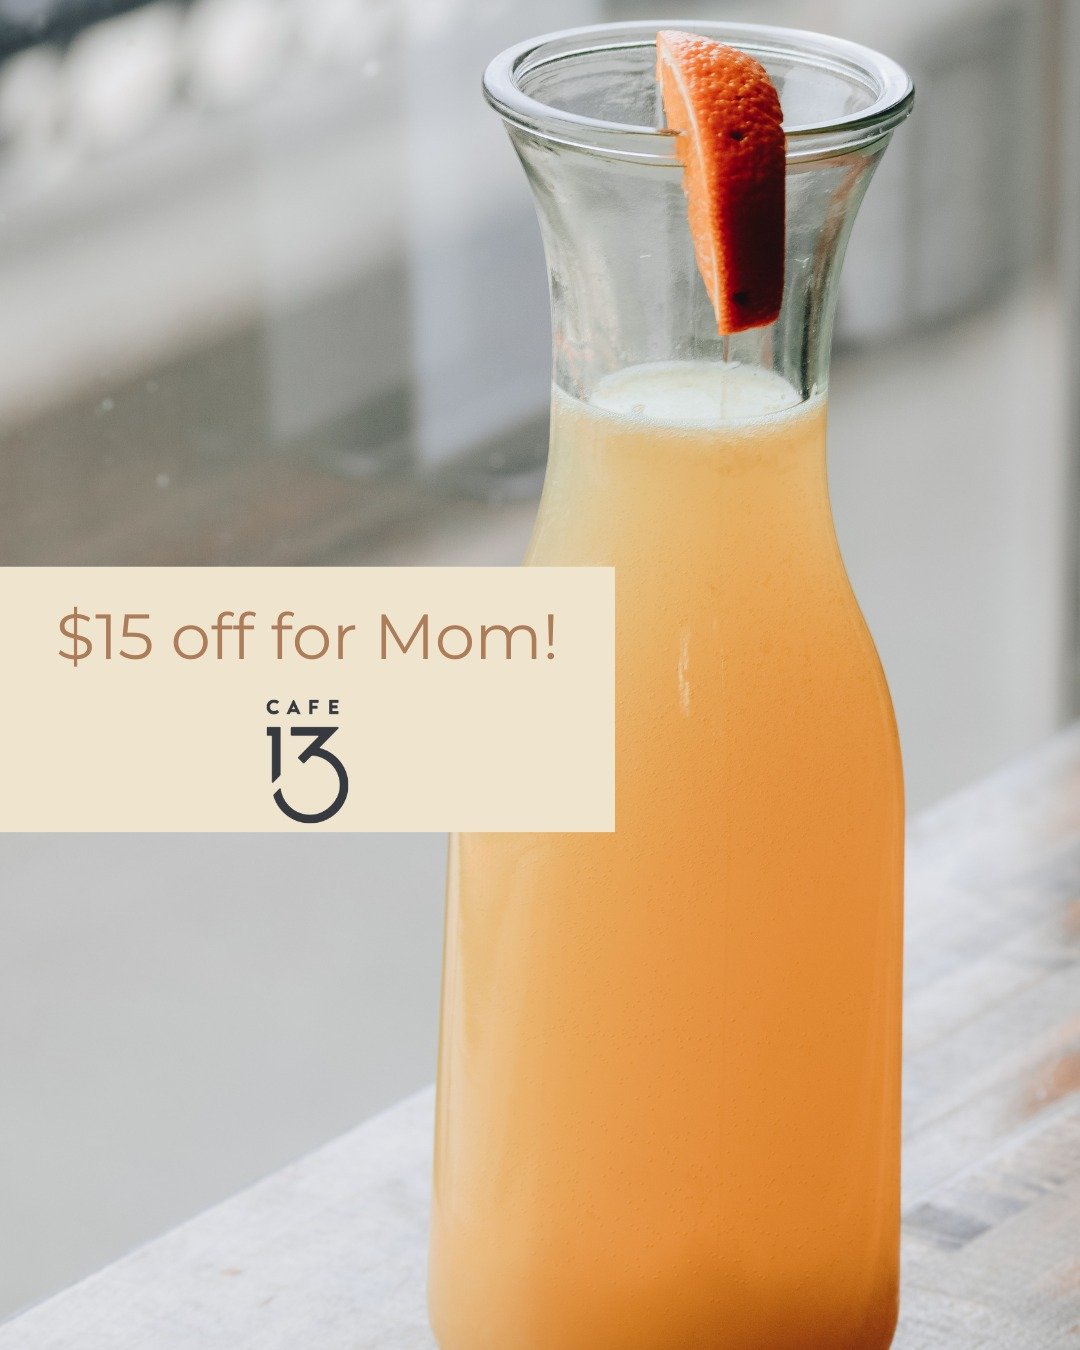 Today only! $15 off Mimosa pitchers for Moms! Show us a photo of you with your kids at the counter to get your discount. Happy Mother's Day! 

#MothersDay #MothersDay2024 #Mimosas #Cafe13 #CelebrateMom